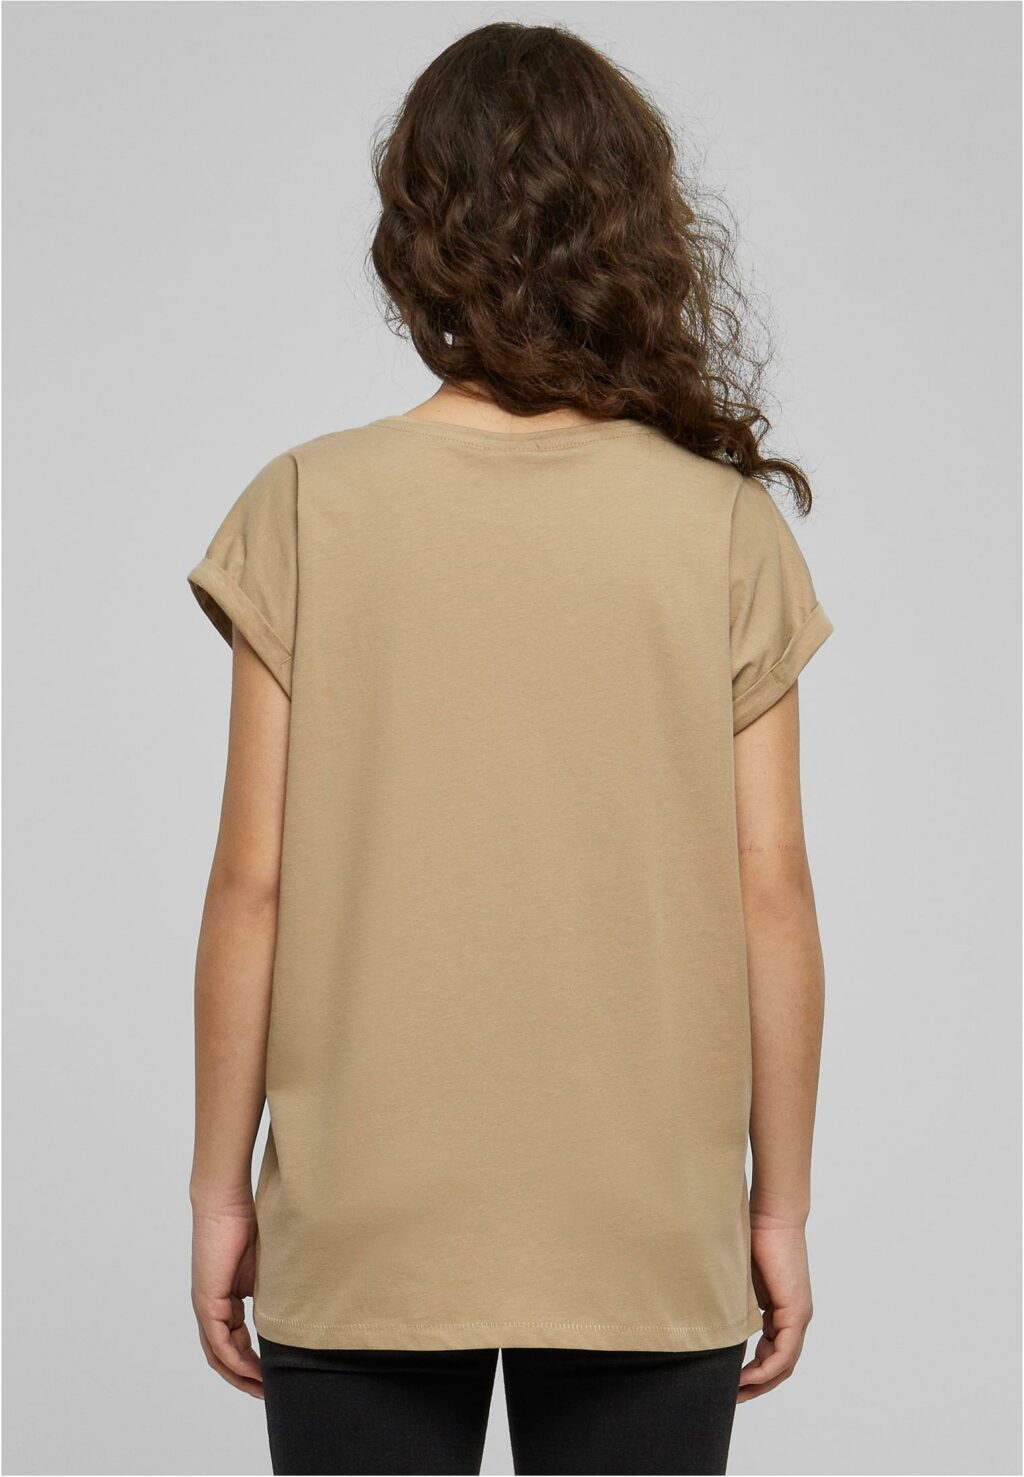 Urban Classics Ladies Extended Shoulder Tee softtaupe TB771